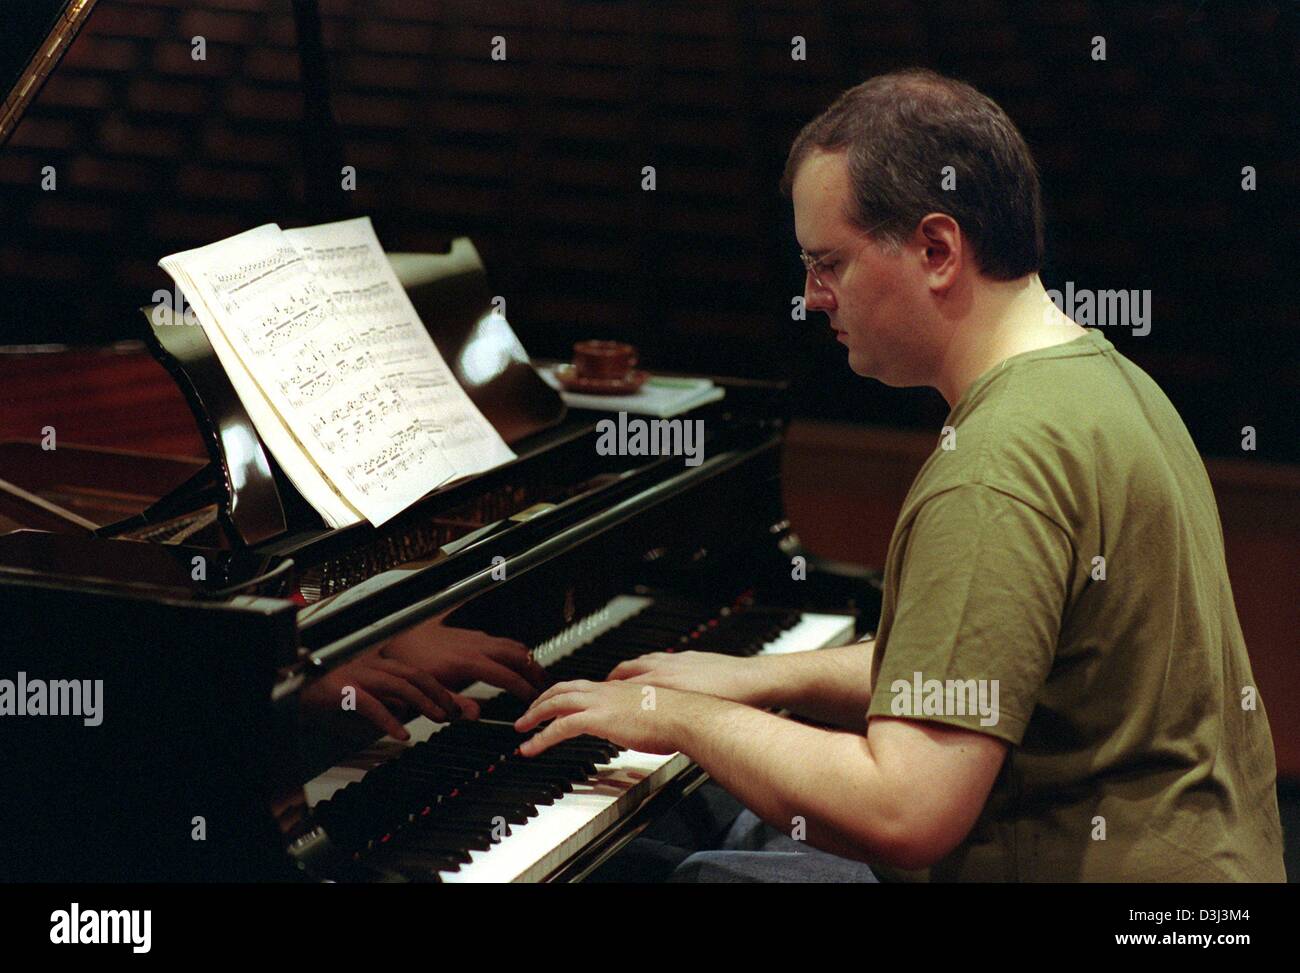 dpa) - Pianist Nicholas Angelich plays the piano during a rehearsal for a  Liszt soiree in Leverkusen, Germany, 19 September 2003. Angelich, a  specialist for classical music and romanticism, was born in